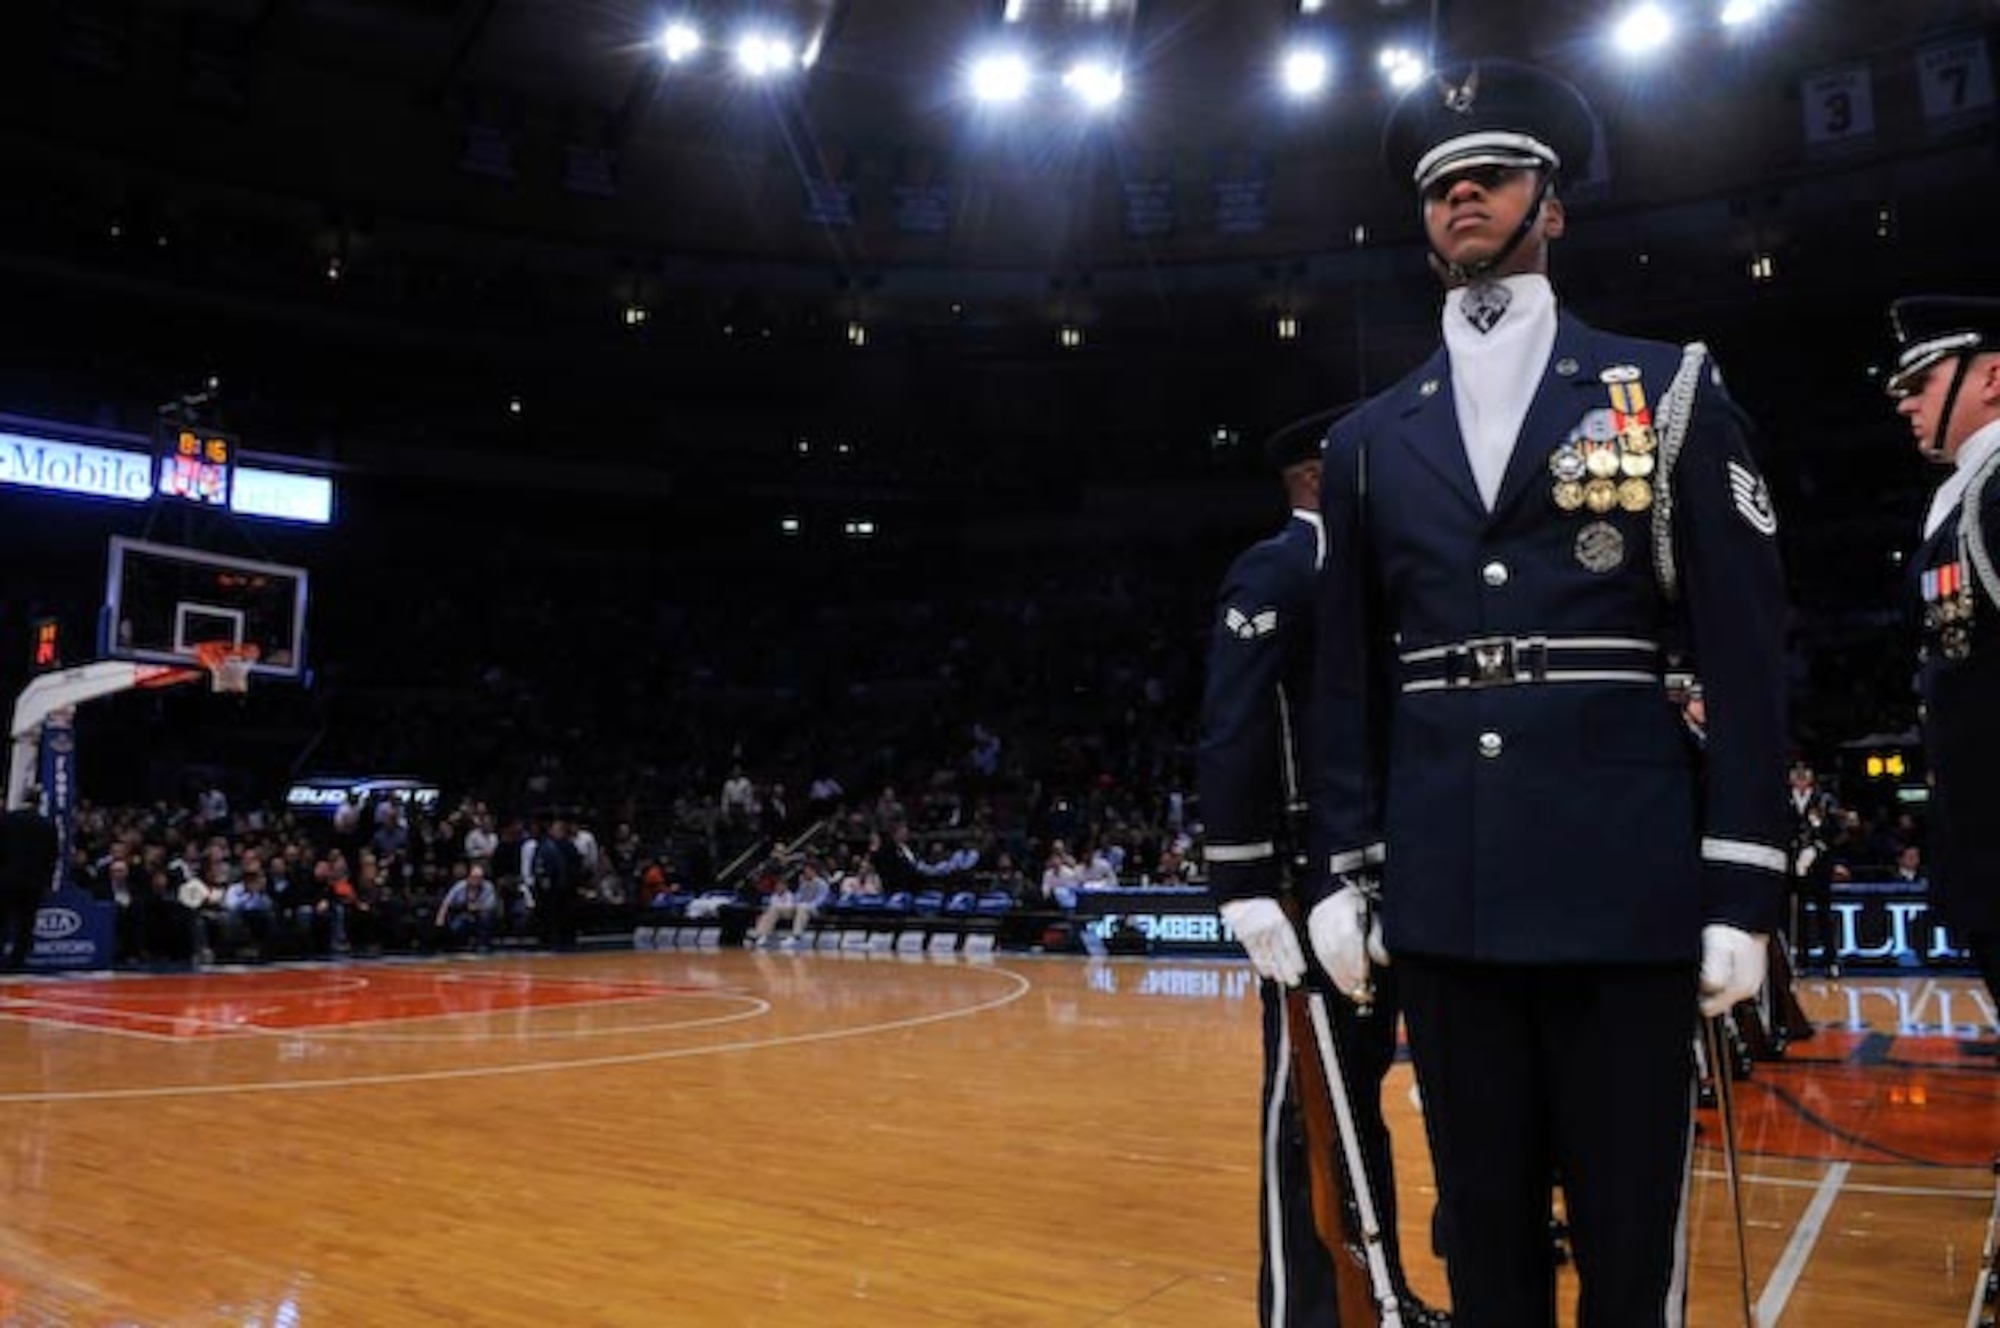 Tech. Sgt. Robert Jones, United States Air Force Honor Guard Drill Team flight chief, prepares to walk down and back through the Drill Team’s spinning rifles in their walkthrough sequence during the New York Knick’s halftime show on Military Appreciation Night at New York’s Madison Square Garden Nov. 11. The Drill Team is the traveling component of the U.S. Air Force Honor Guard and tours worldwide representing all Airmen while showcasing Air Force precision and professionalism. (U.S. Air Force photo by Senior Airman Marleah Miller)